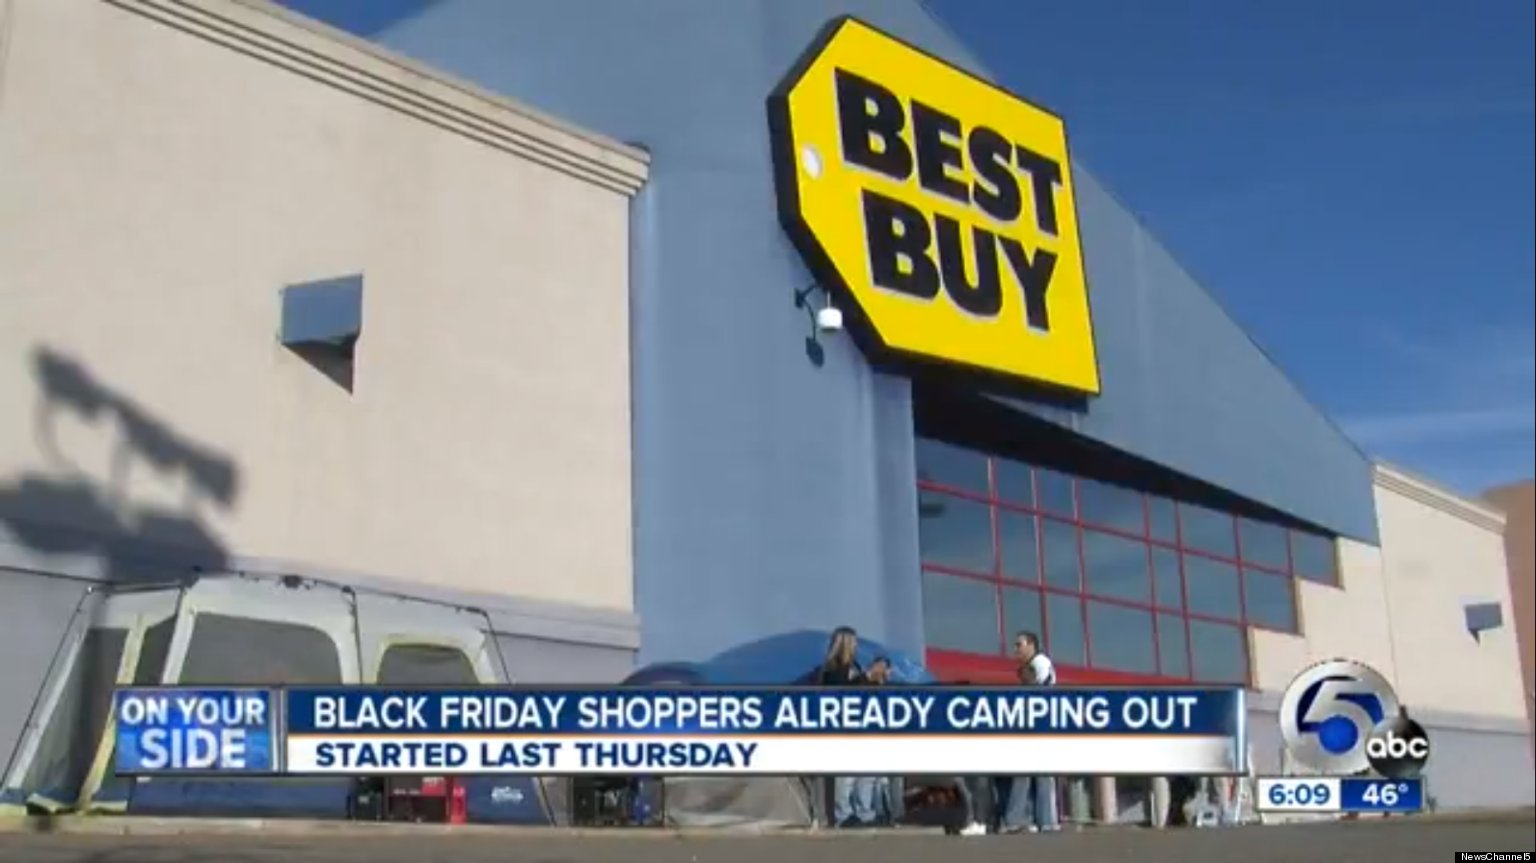 Best Buy Black Friday Shoppers In Line One Week Before Thanksgiving | HuffPost